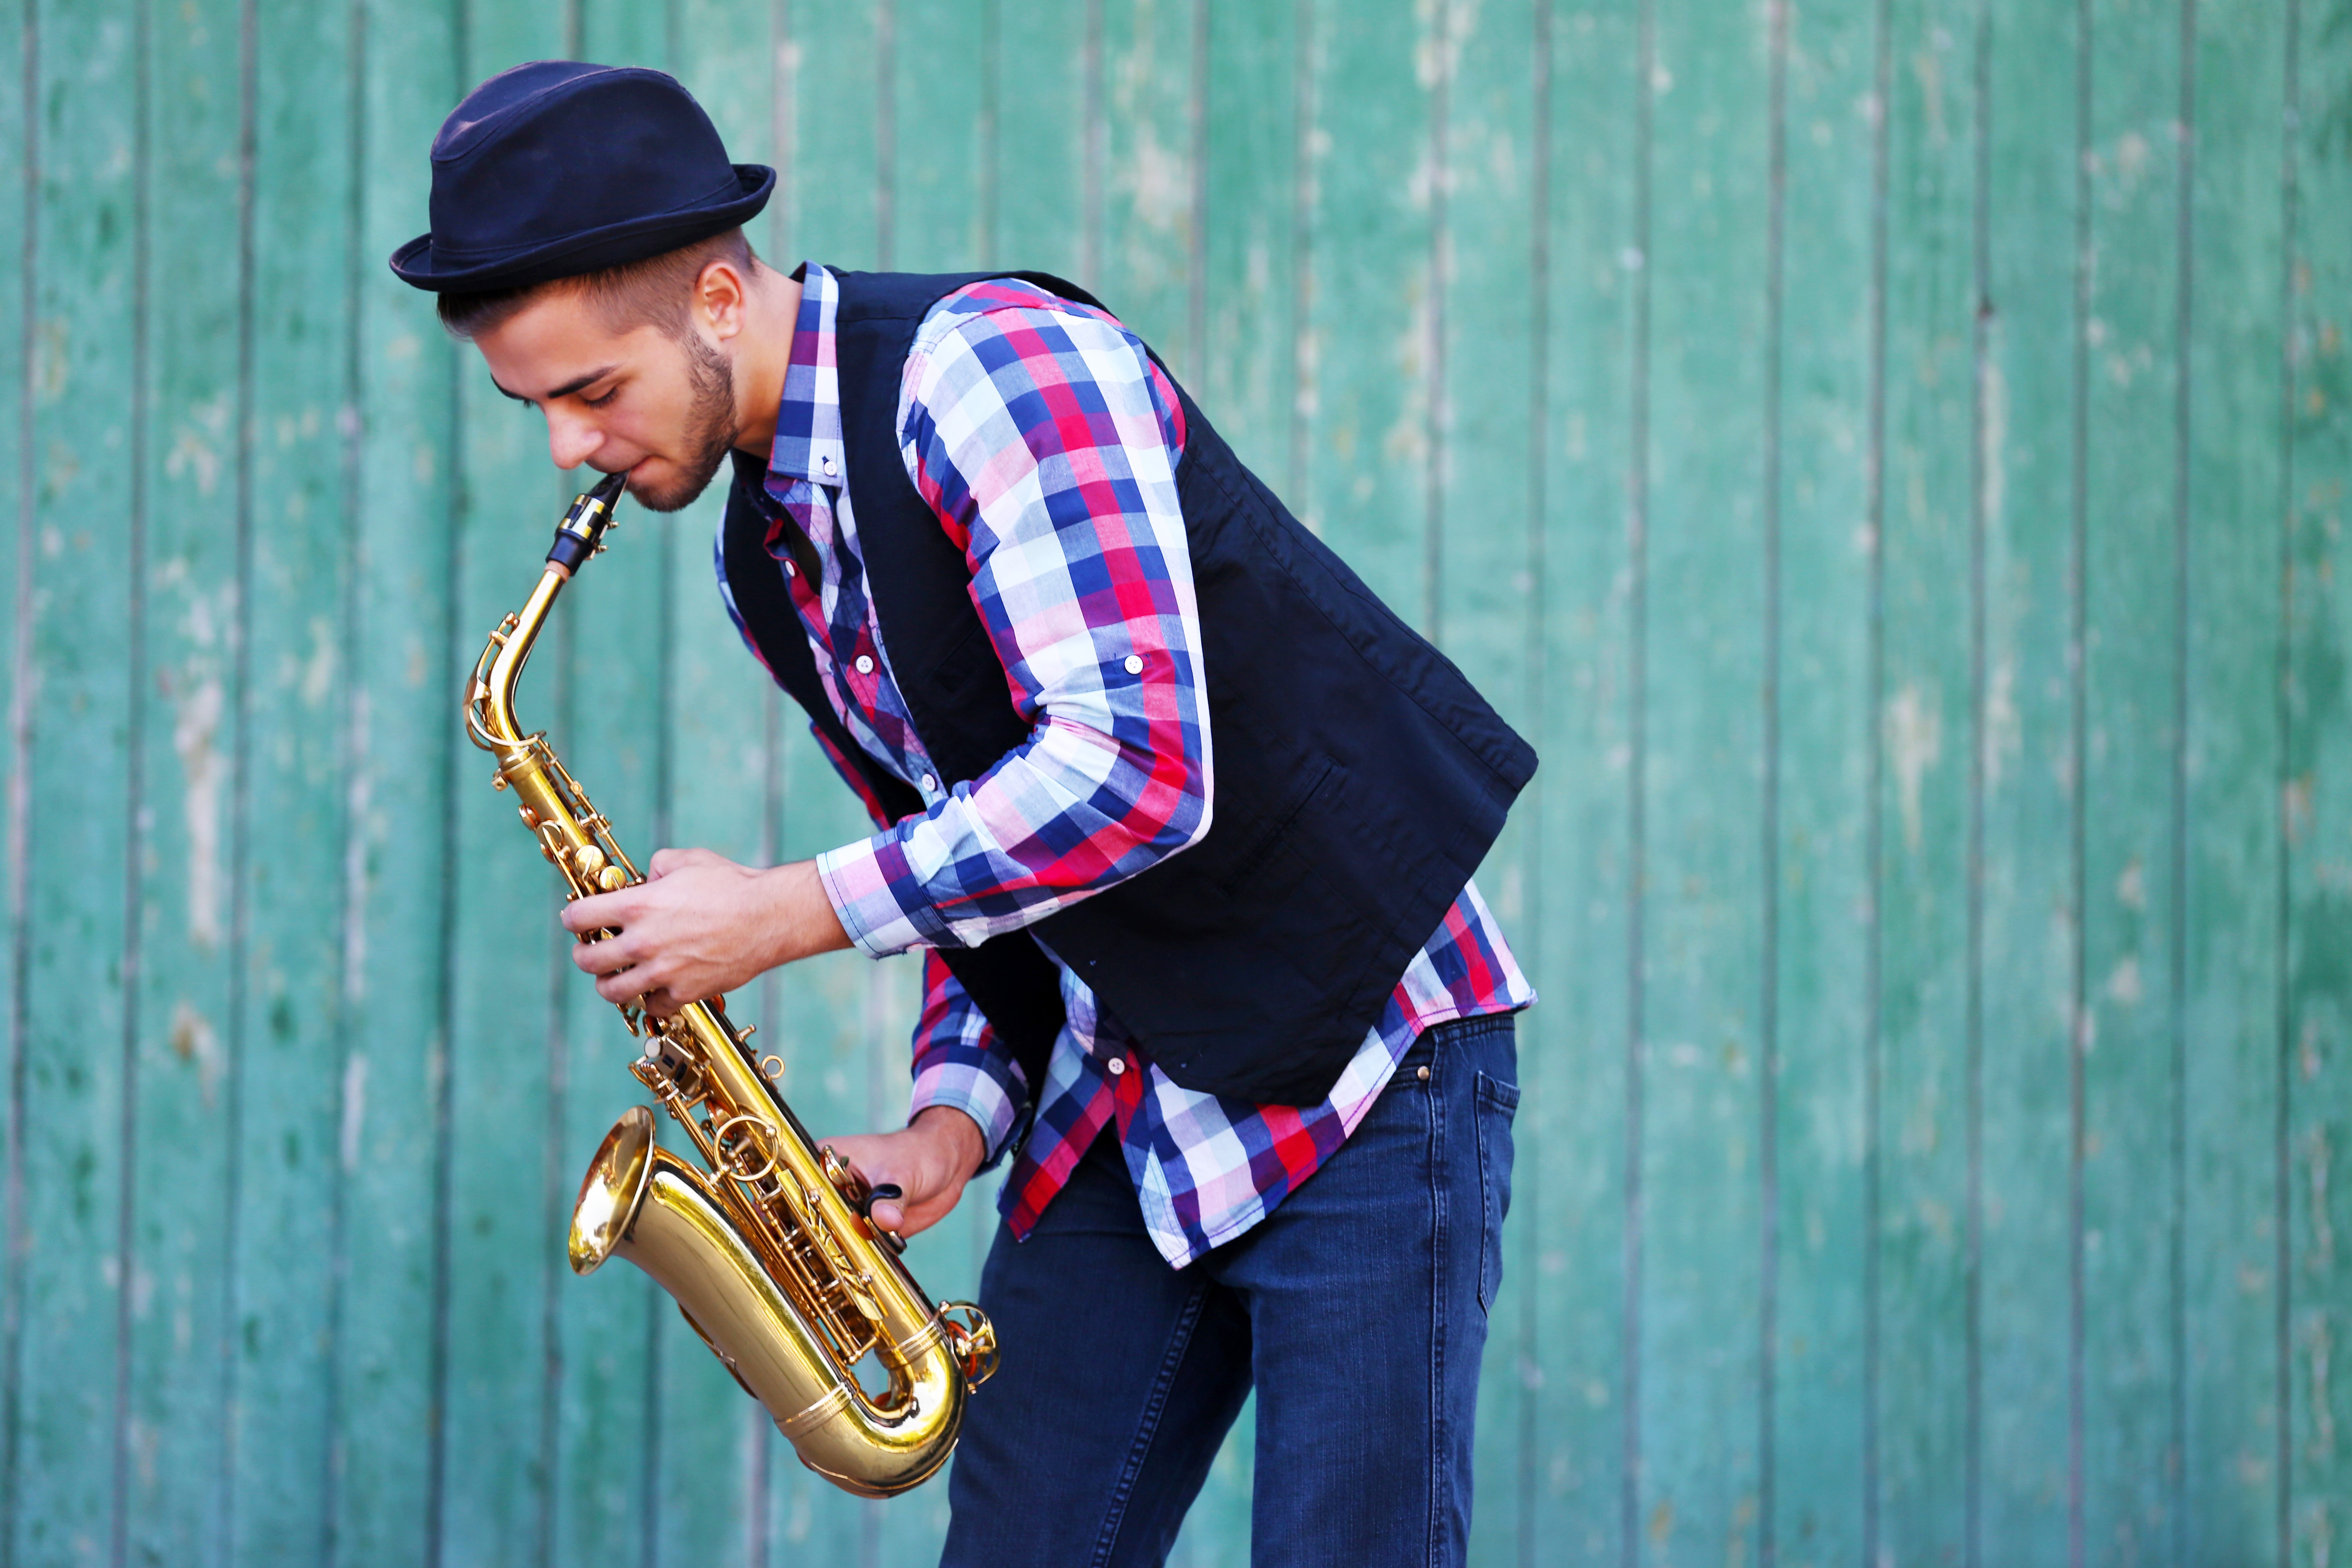 One Crucial Tip for Musicians: Wear Hearing Protection!